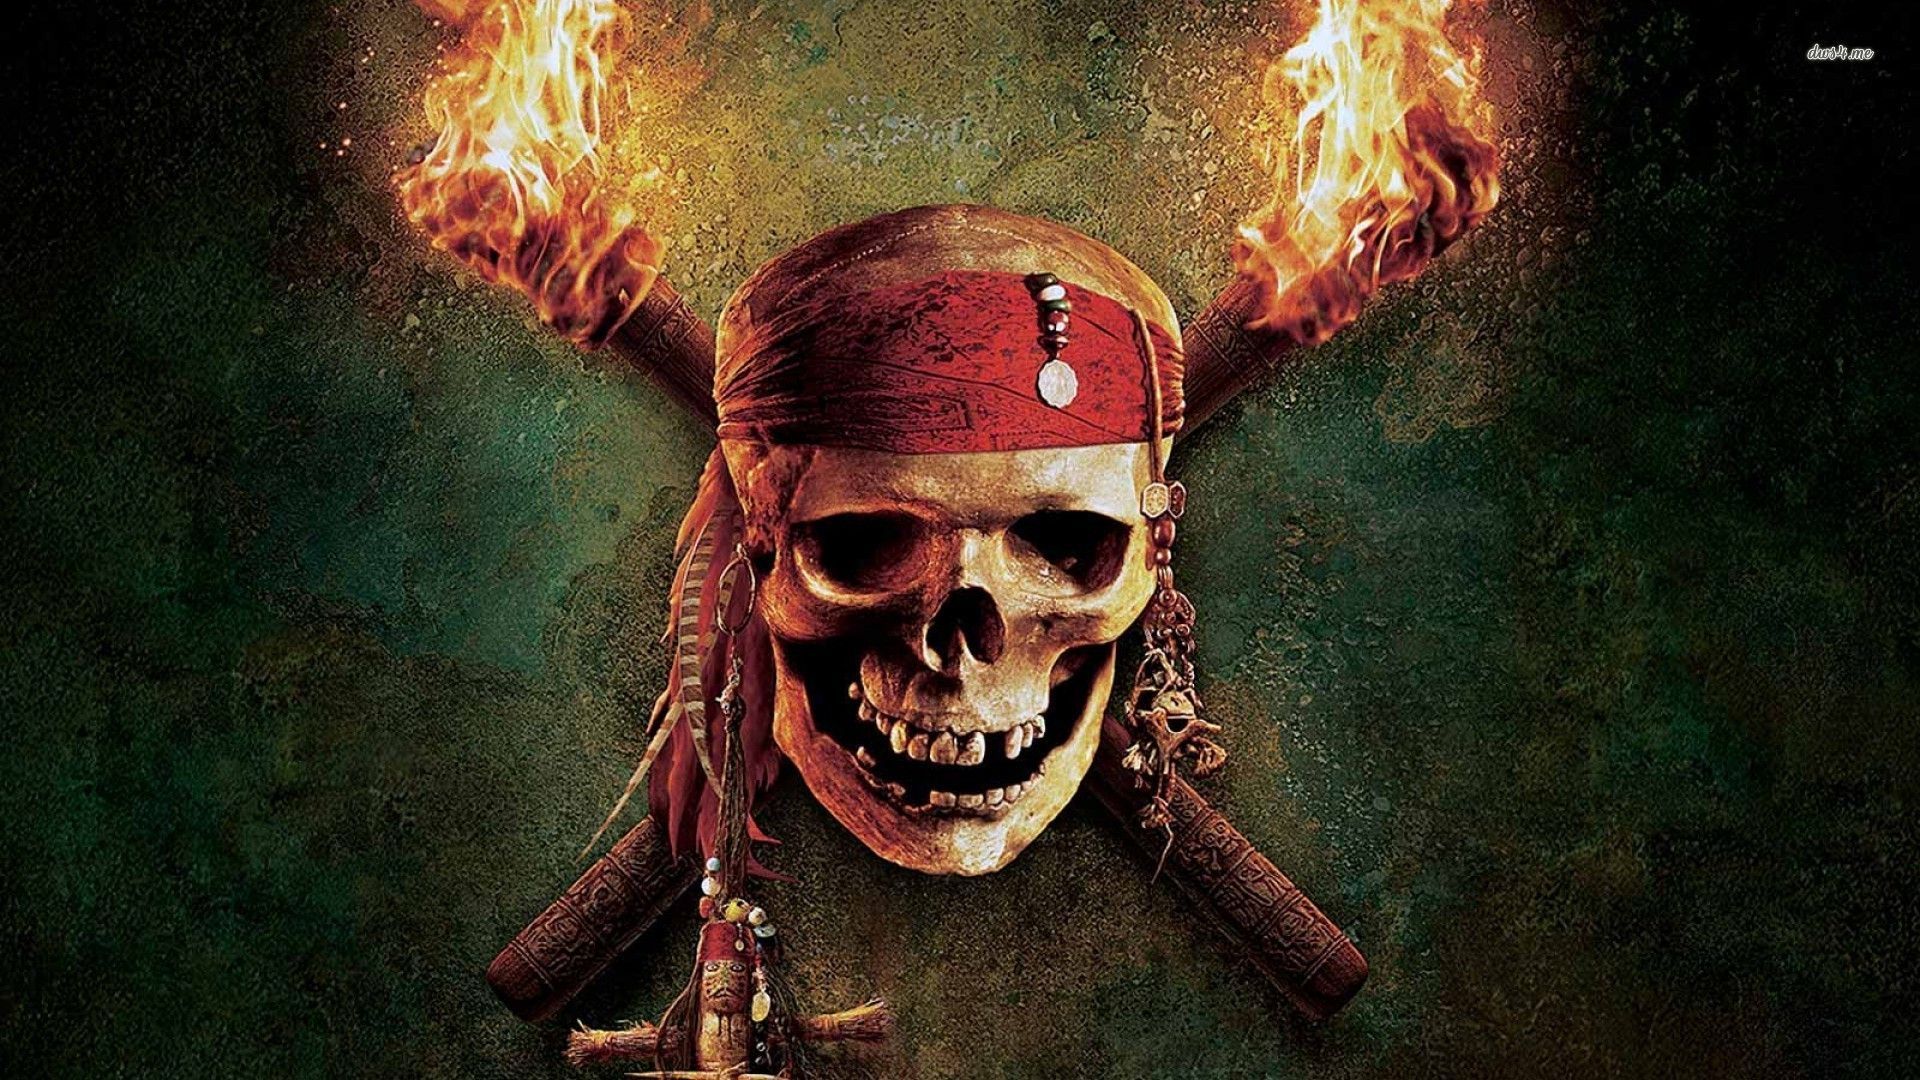 Pirates of the Caribbean wallpaper - Movie wallpapers - #19676